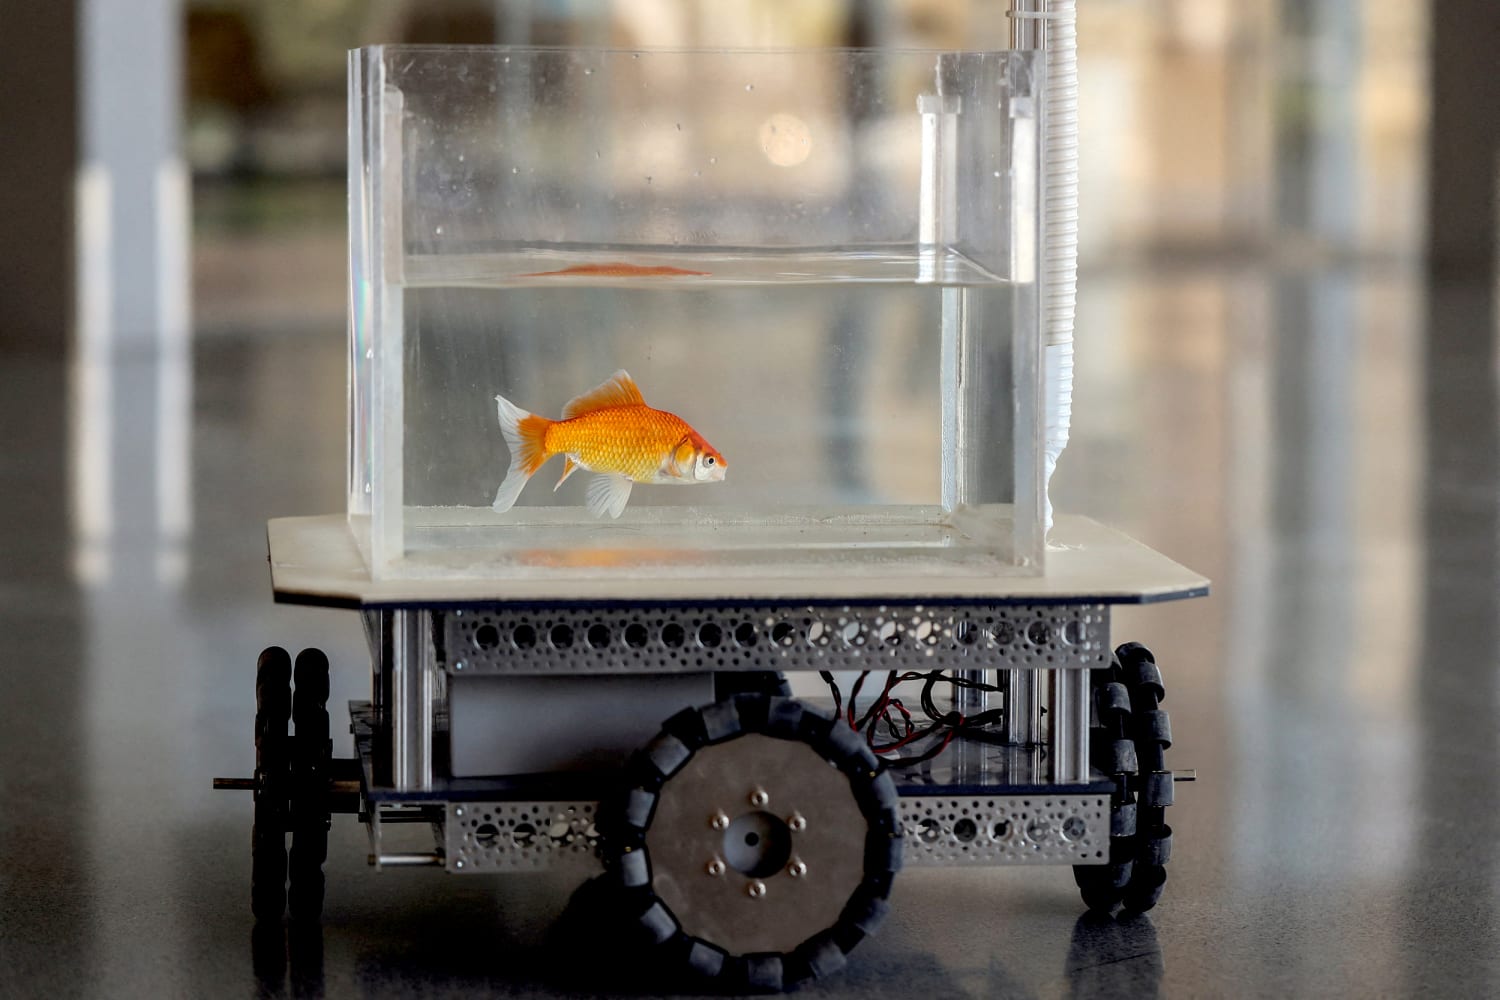 A ‘fish-operated vehicle’? Scientists teach goldfish to drive and find they’re good at it